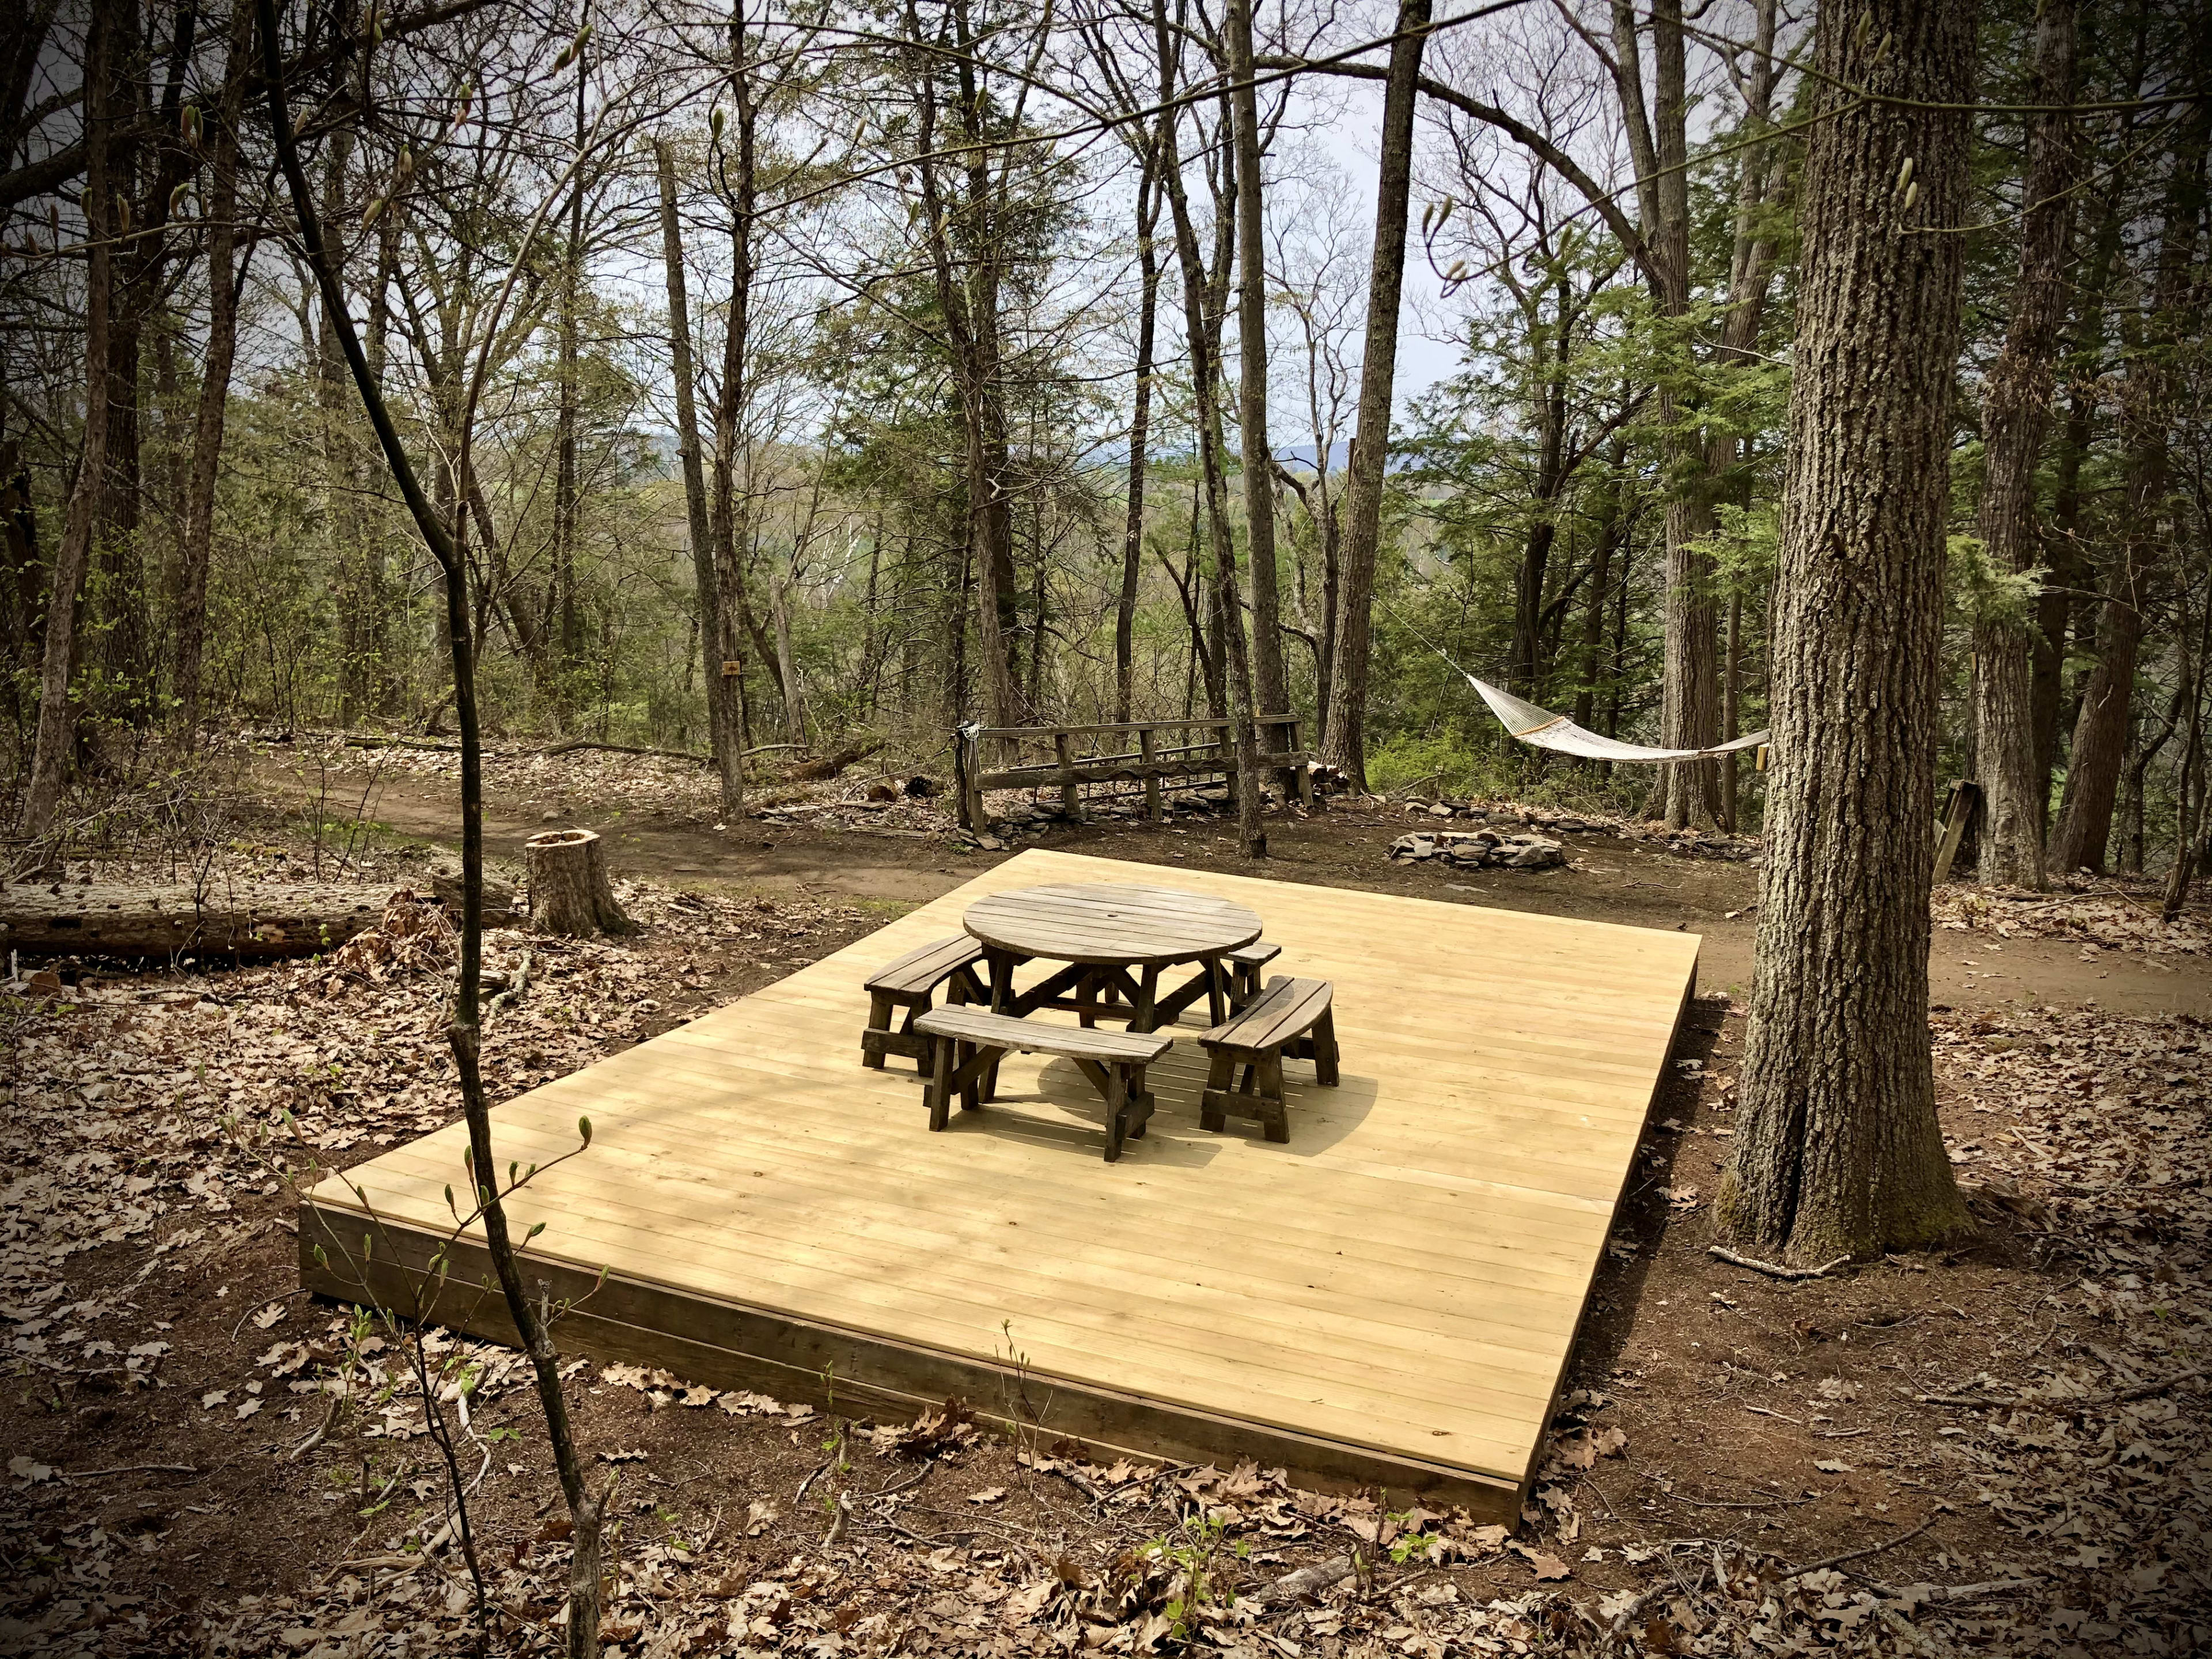 This is it. A simple, sturdy platform to pitch your tent. The site includes a picnic table with four benches, firewood and fire-pit, and an outdoor hammock to lounge in.